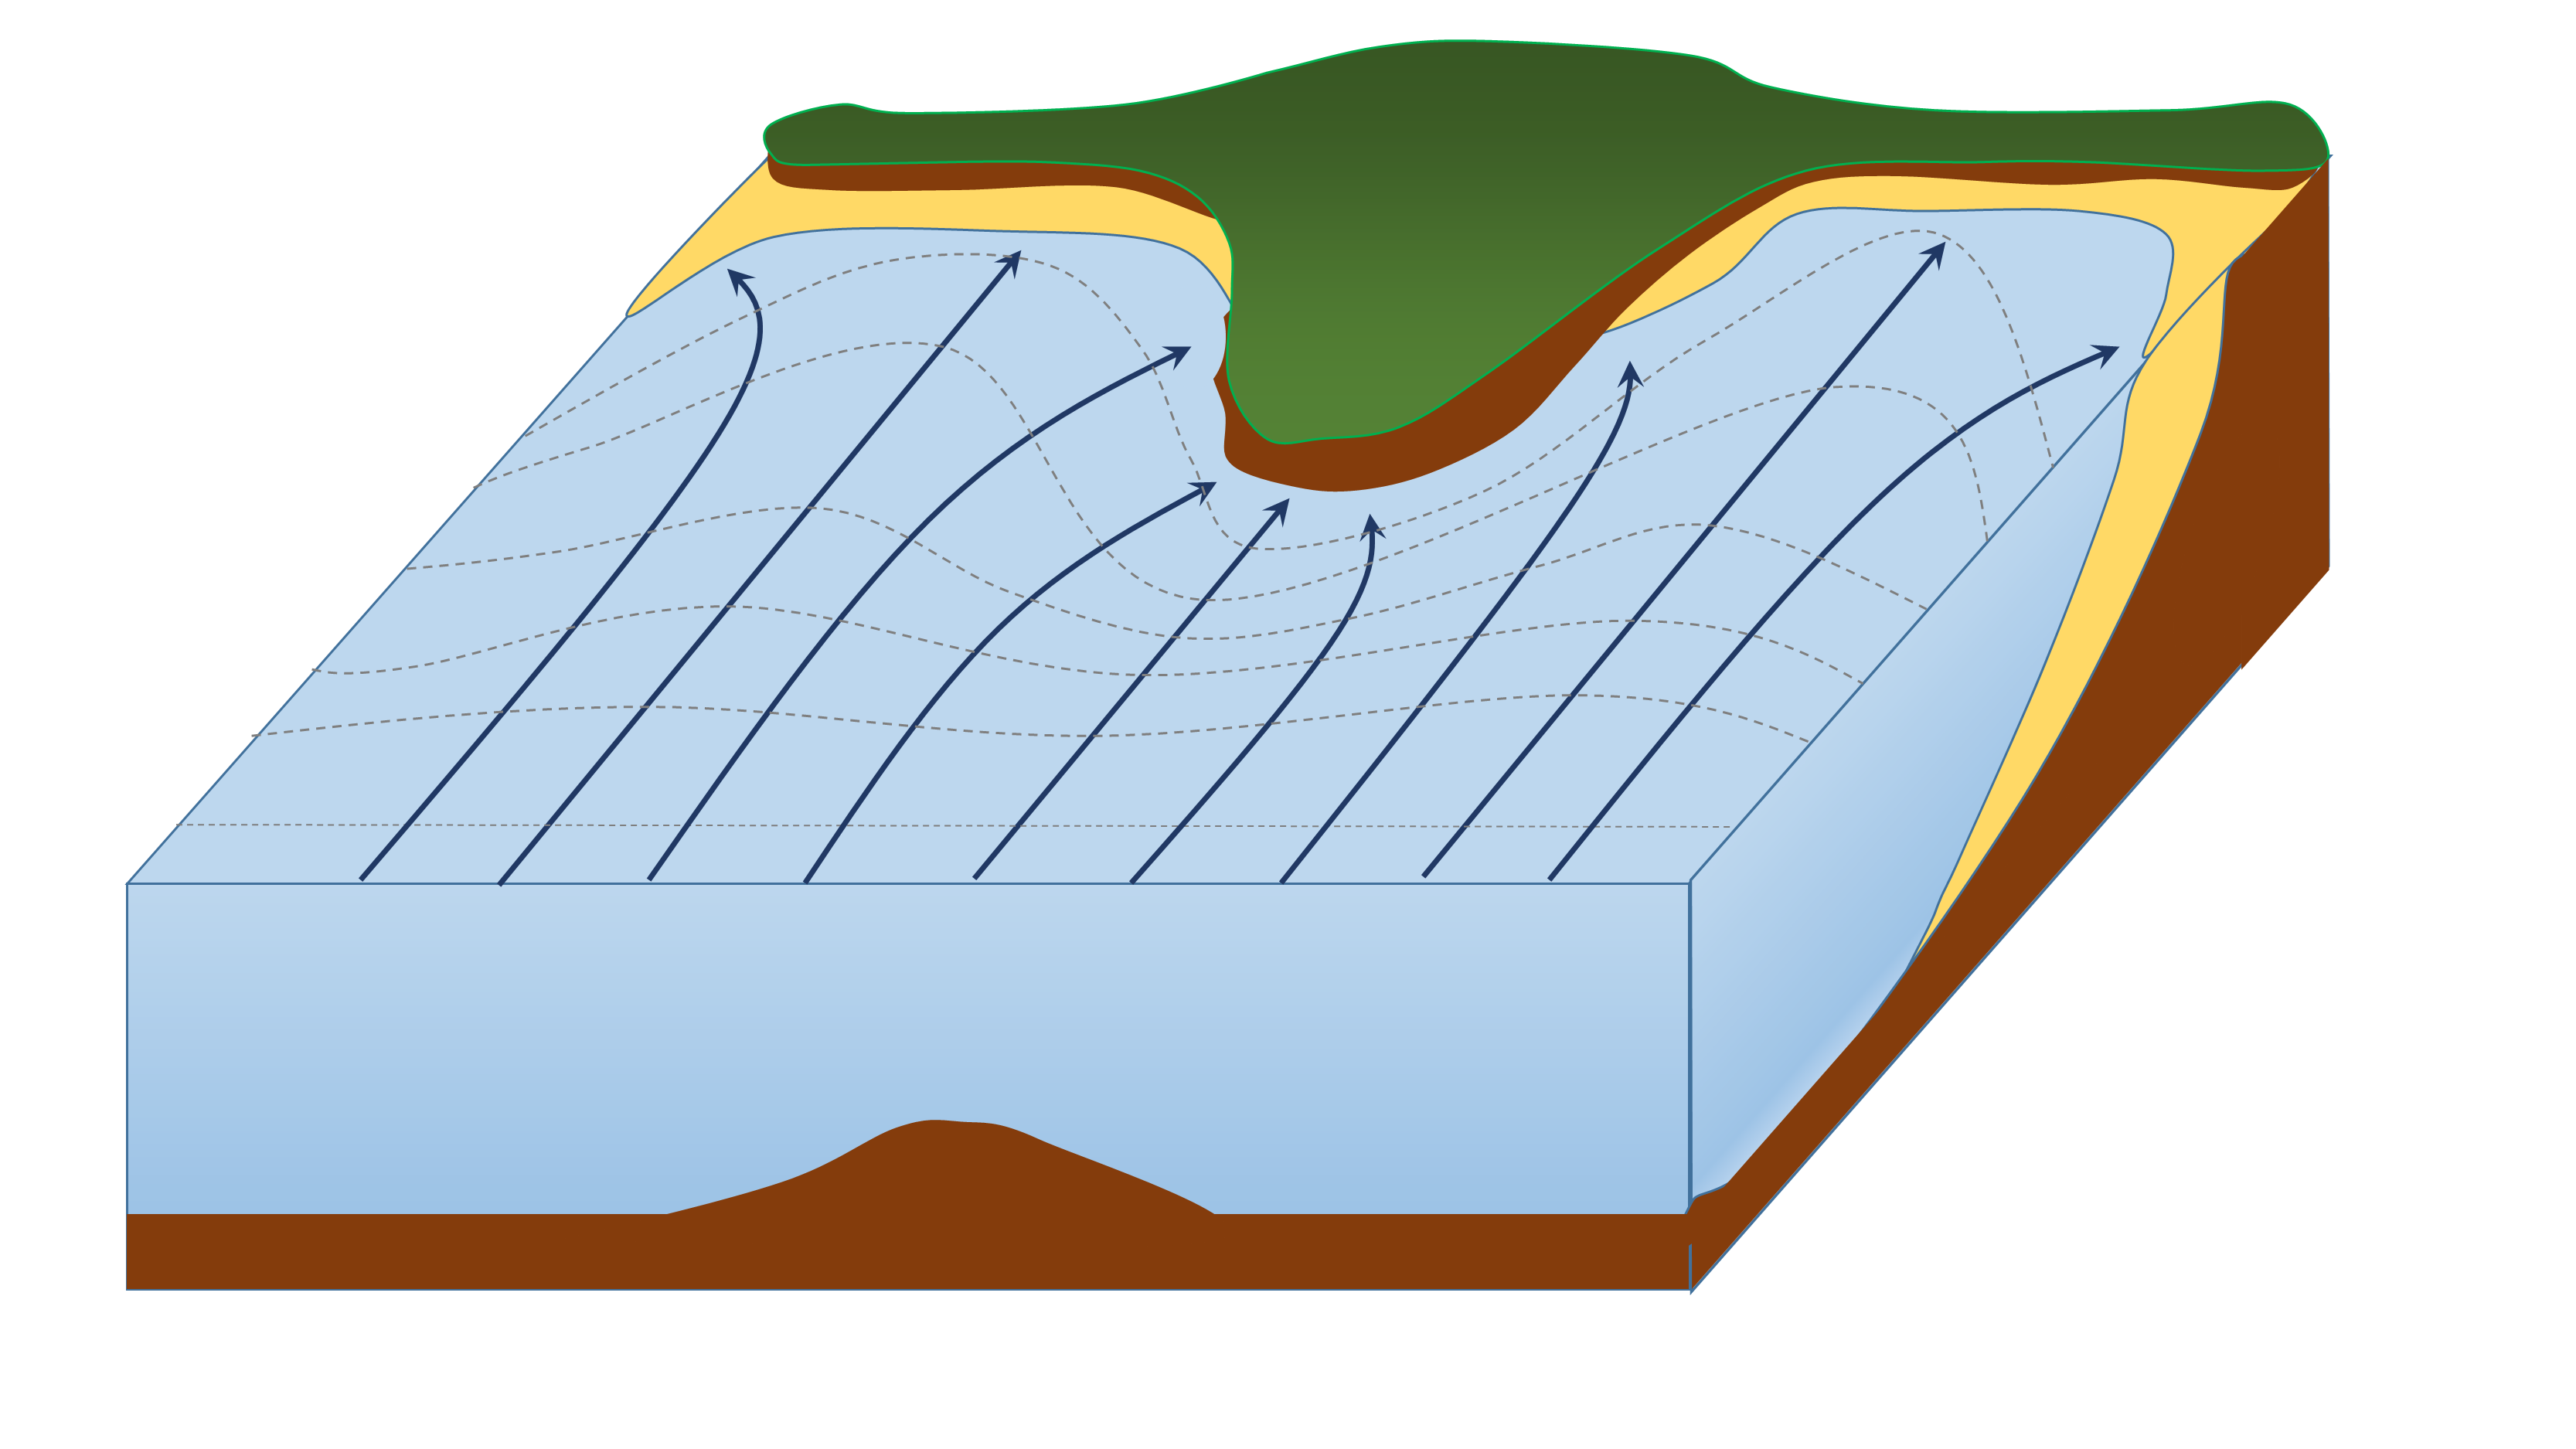 Wave run-up for (very) steep slopes compared to gentle slopes and